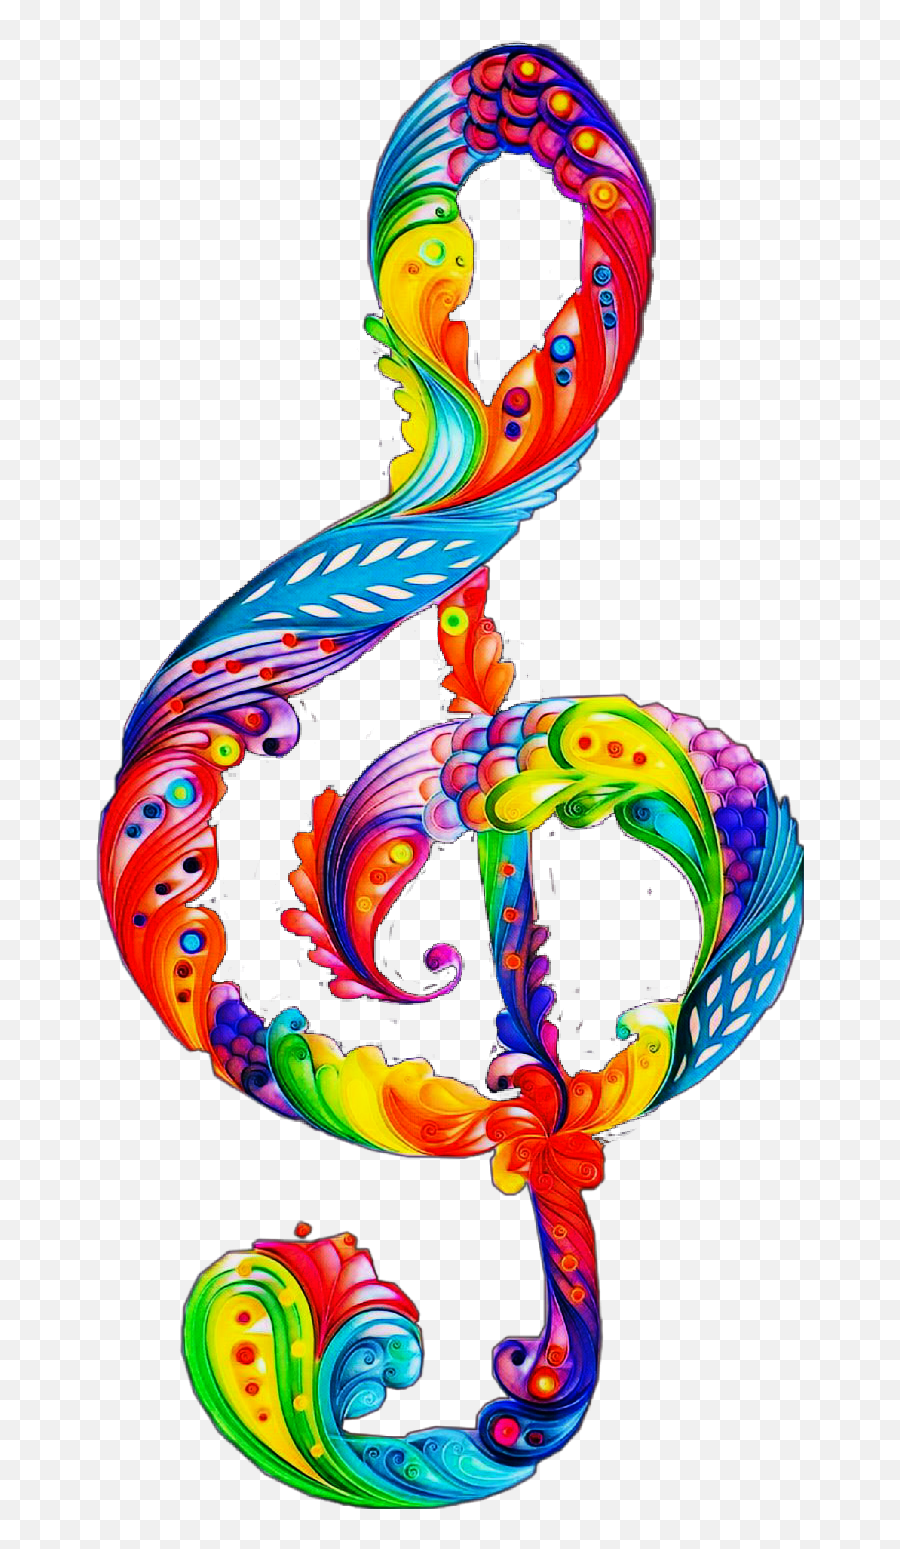 Largest Collection Of Free - Toedit Treble Clef Stickers On Immagini Note Musicali E Arcobaleno Emoji,Treble Clef Emoji